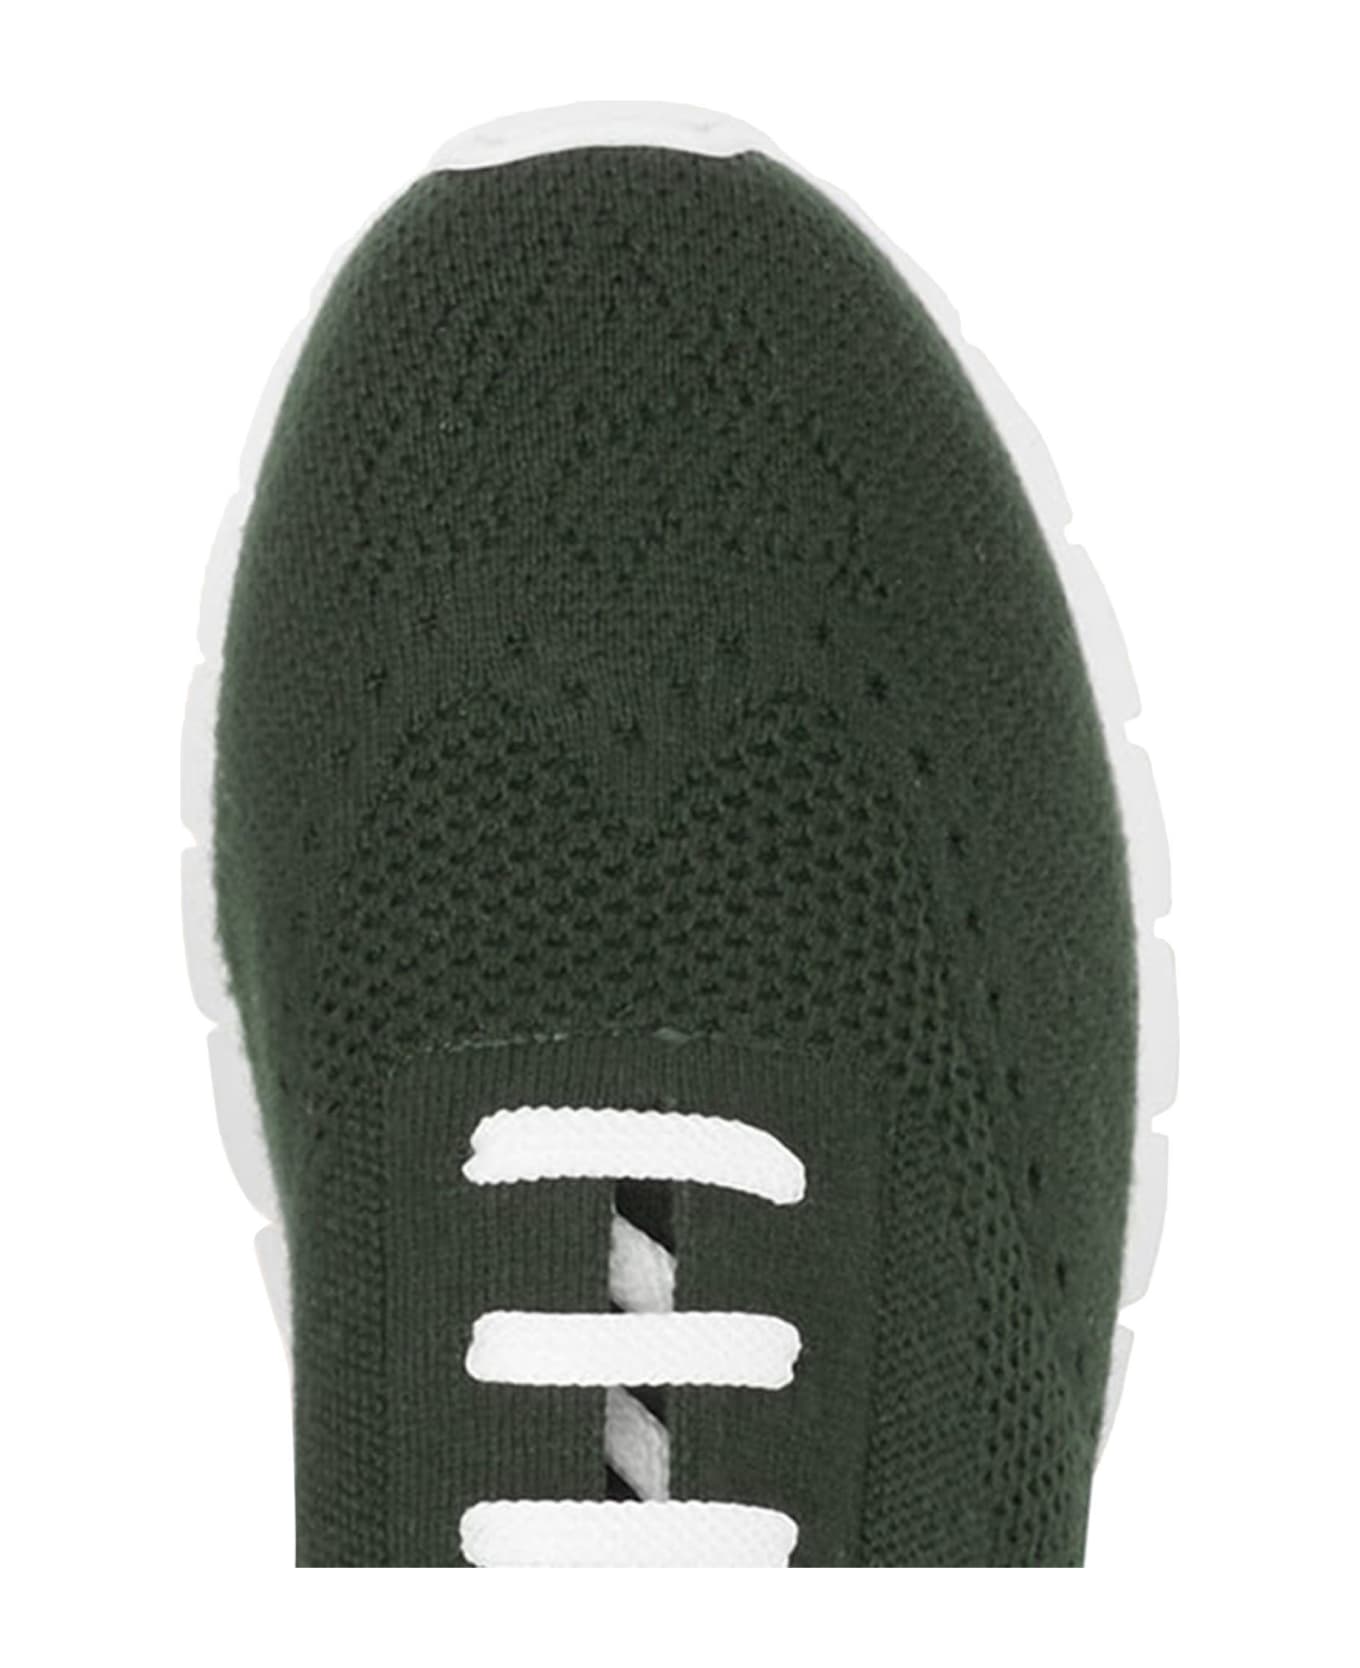 Kiton Sneakers Shoes Cashmere - PINE GREEN スニーカー